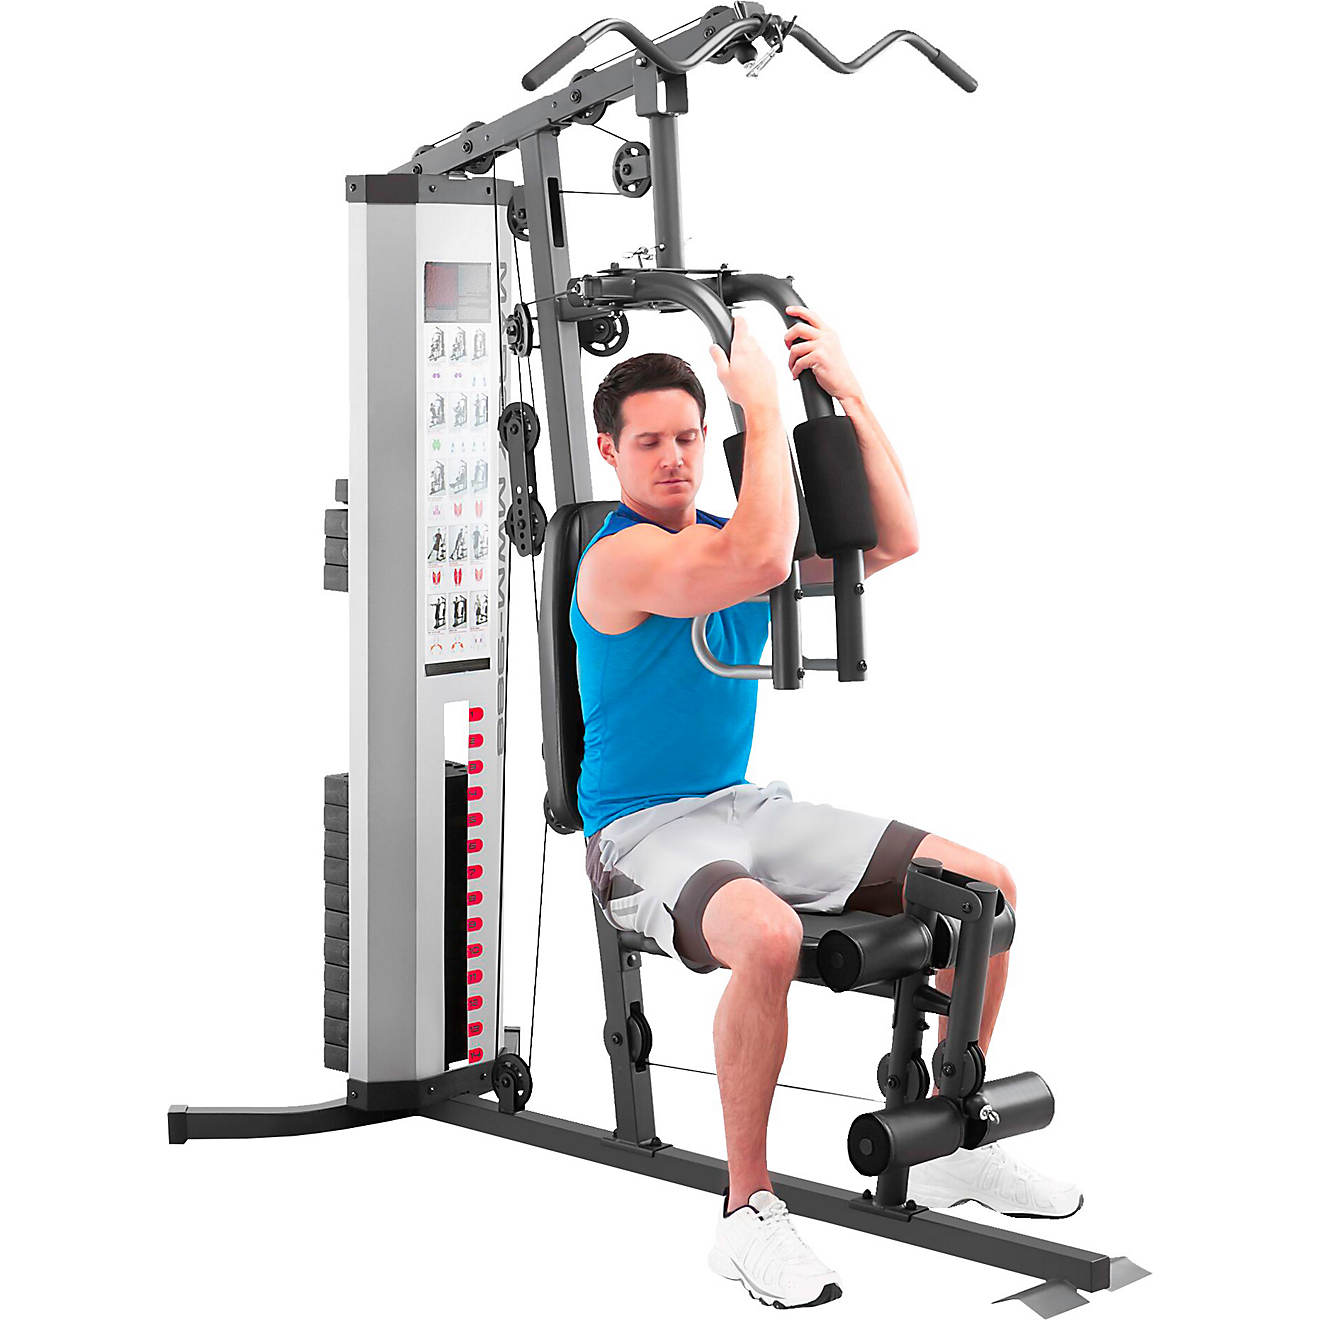 Marcy MWM-988 Home Gym Review